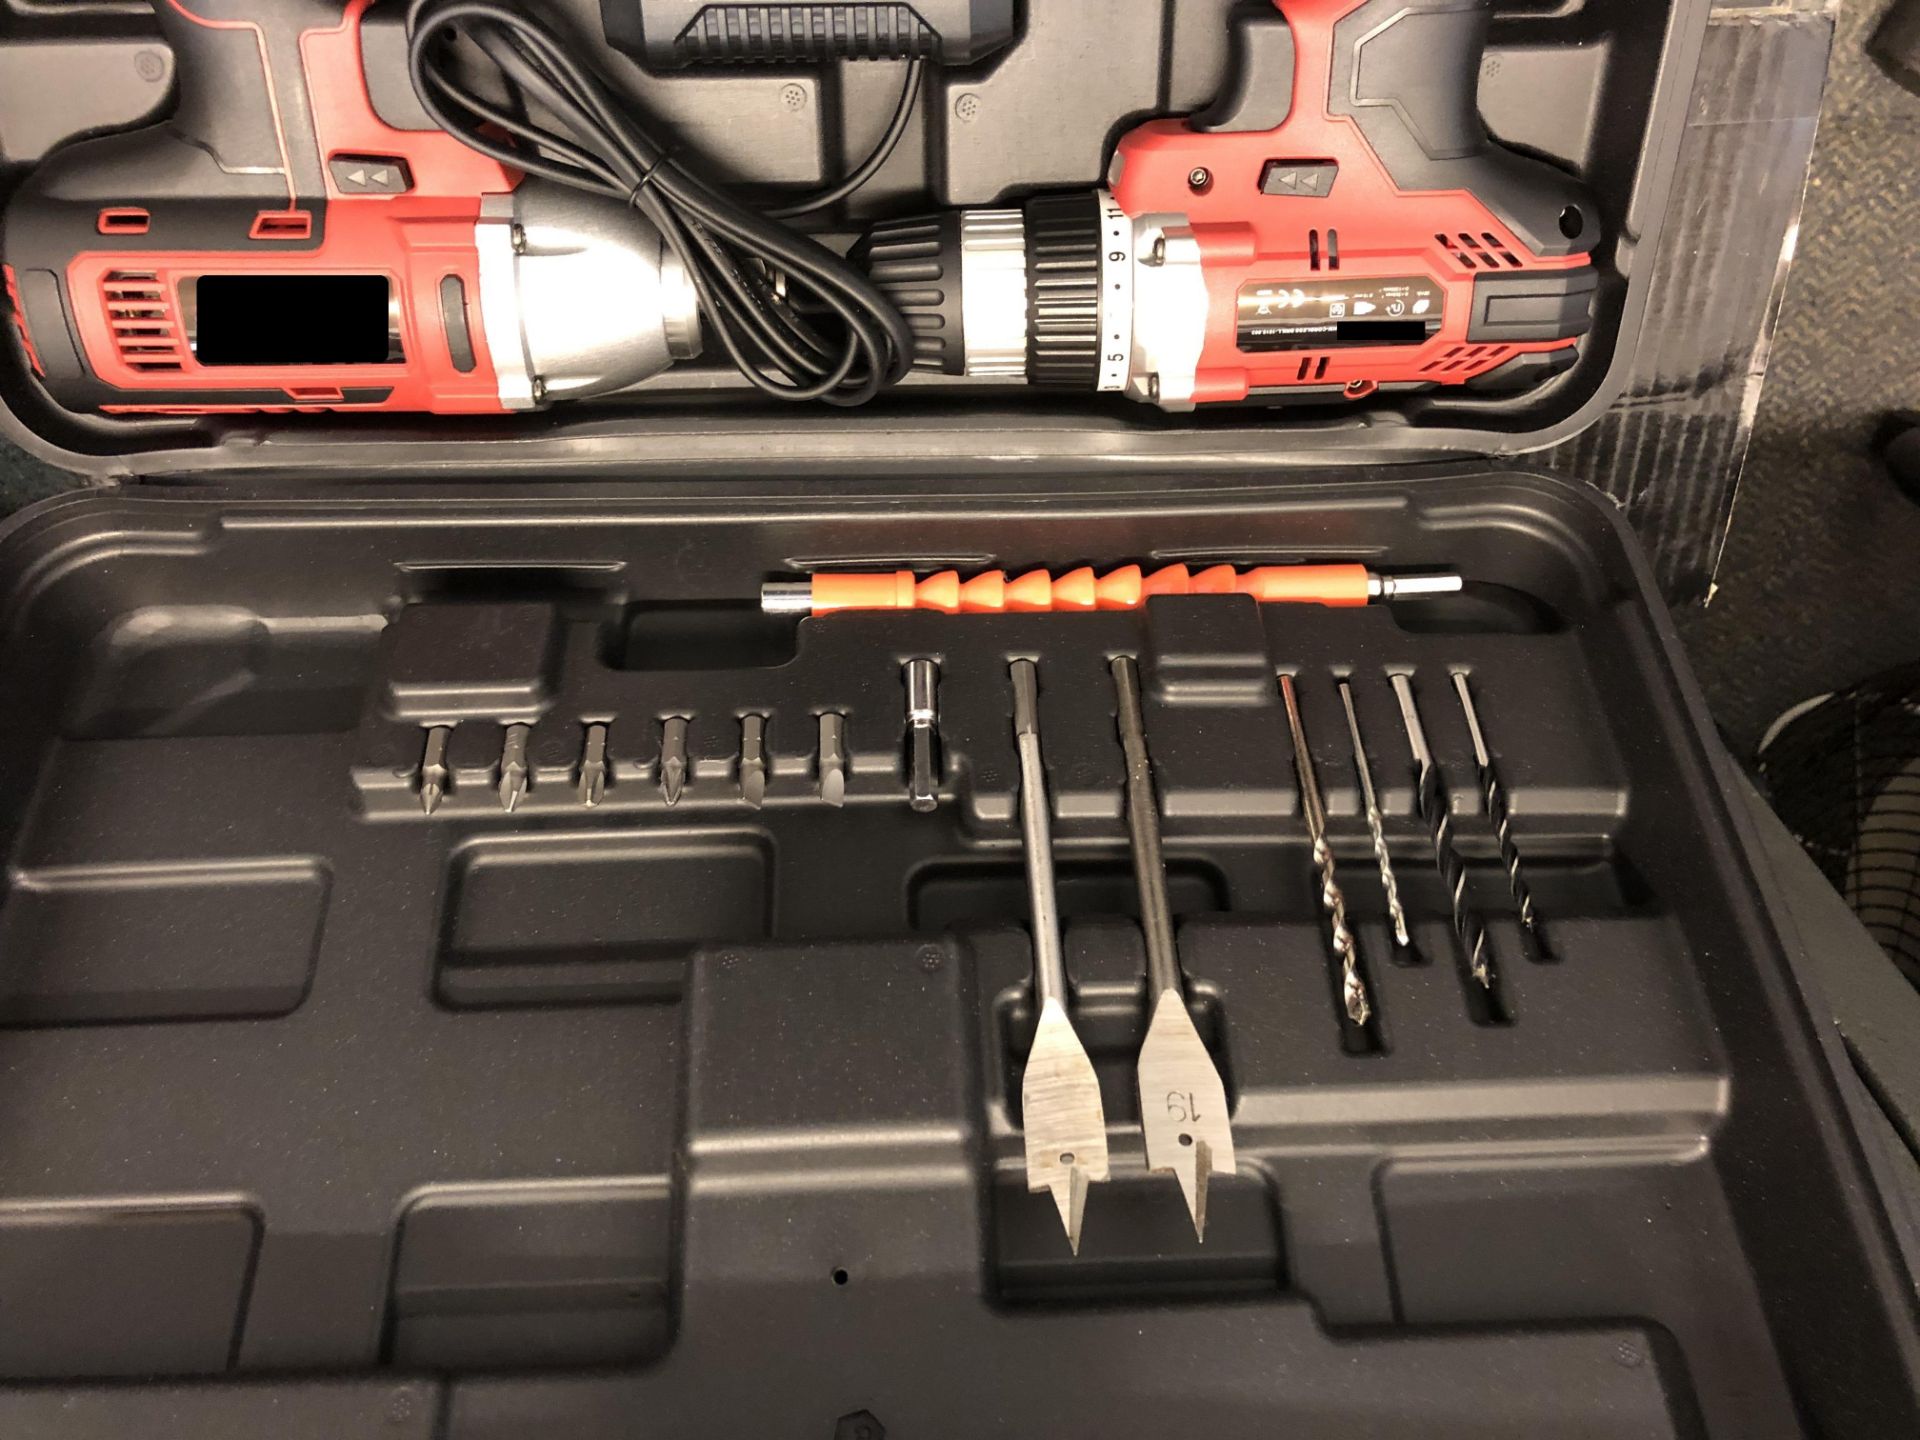 V Brand New 36V Twin Pack Cordless Drill/Driver And Cordless Impact Driver - 1 Hour Charge - 3.0Ah - Image 2 of 3